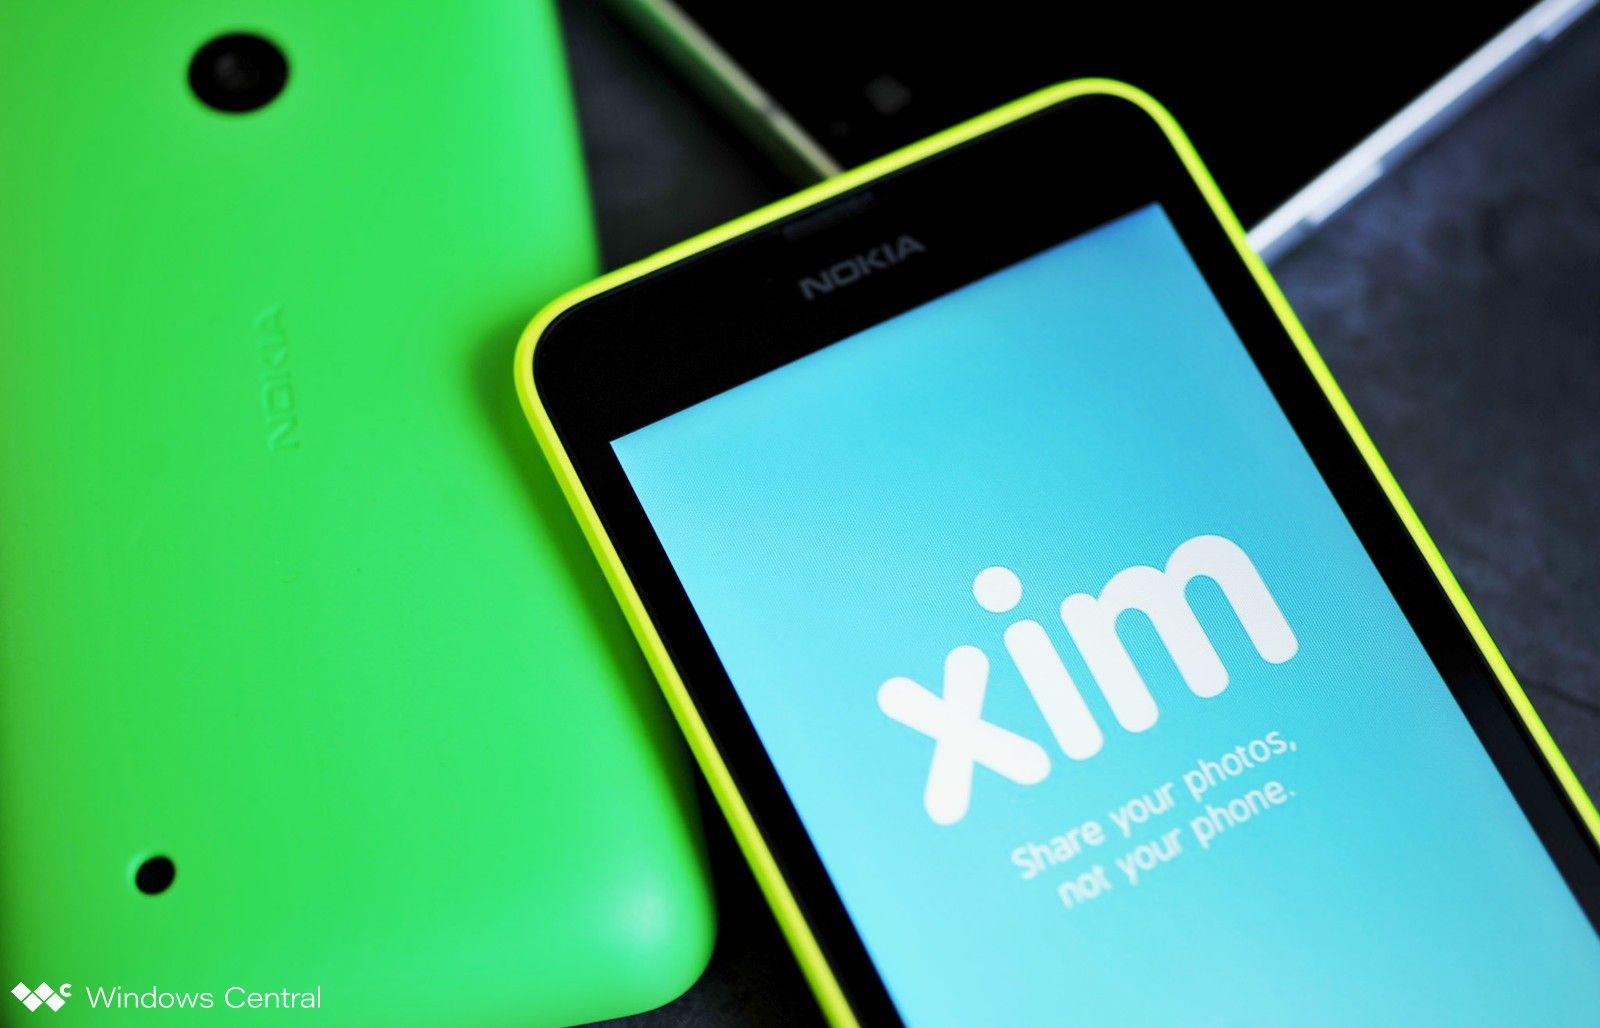 Xim Logo - Xim from Microsoft Research now shares photo with Xbox One